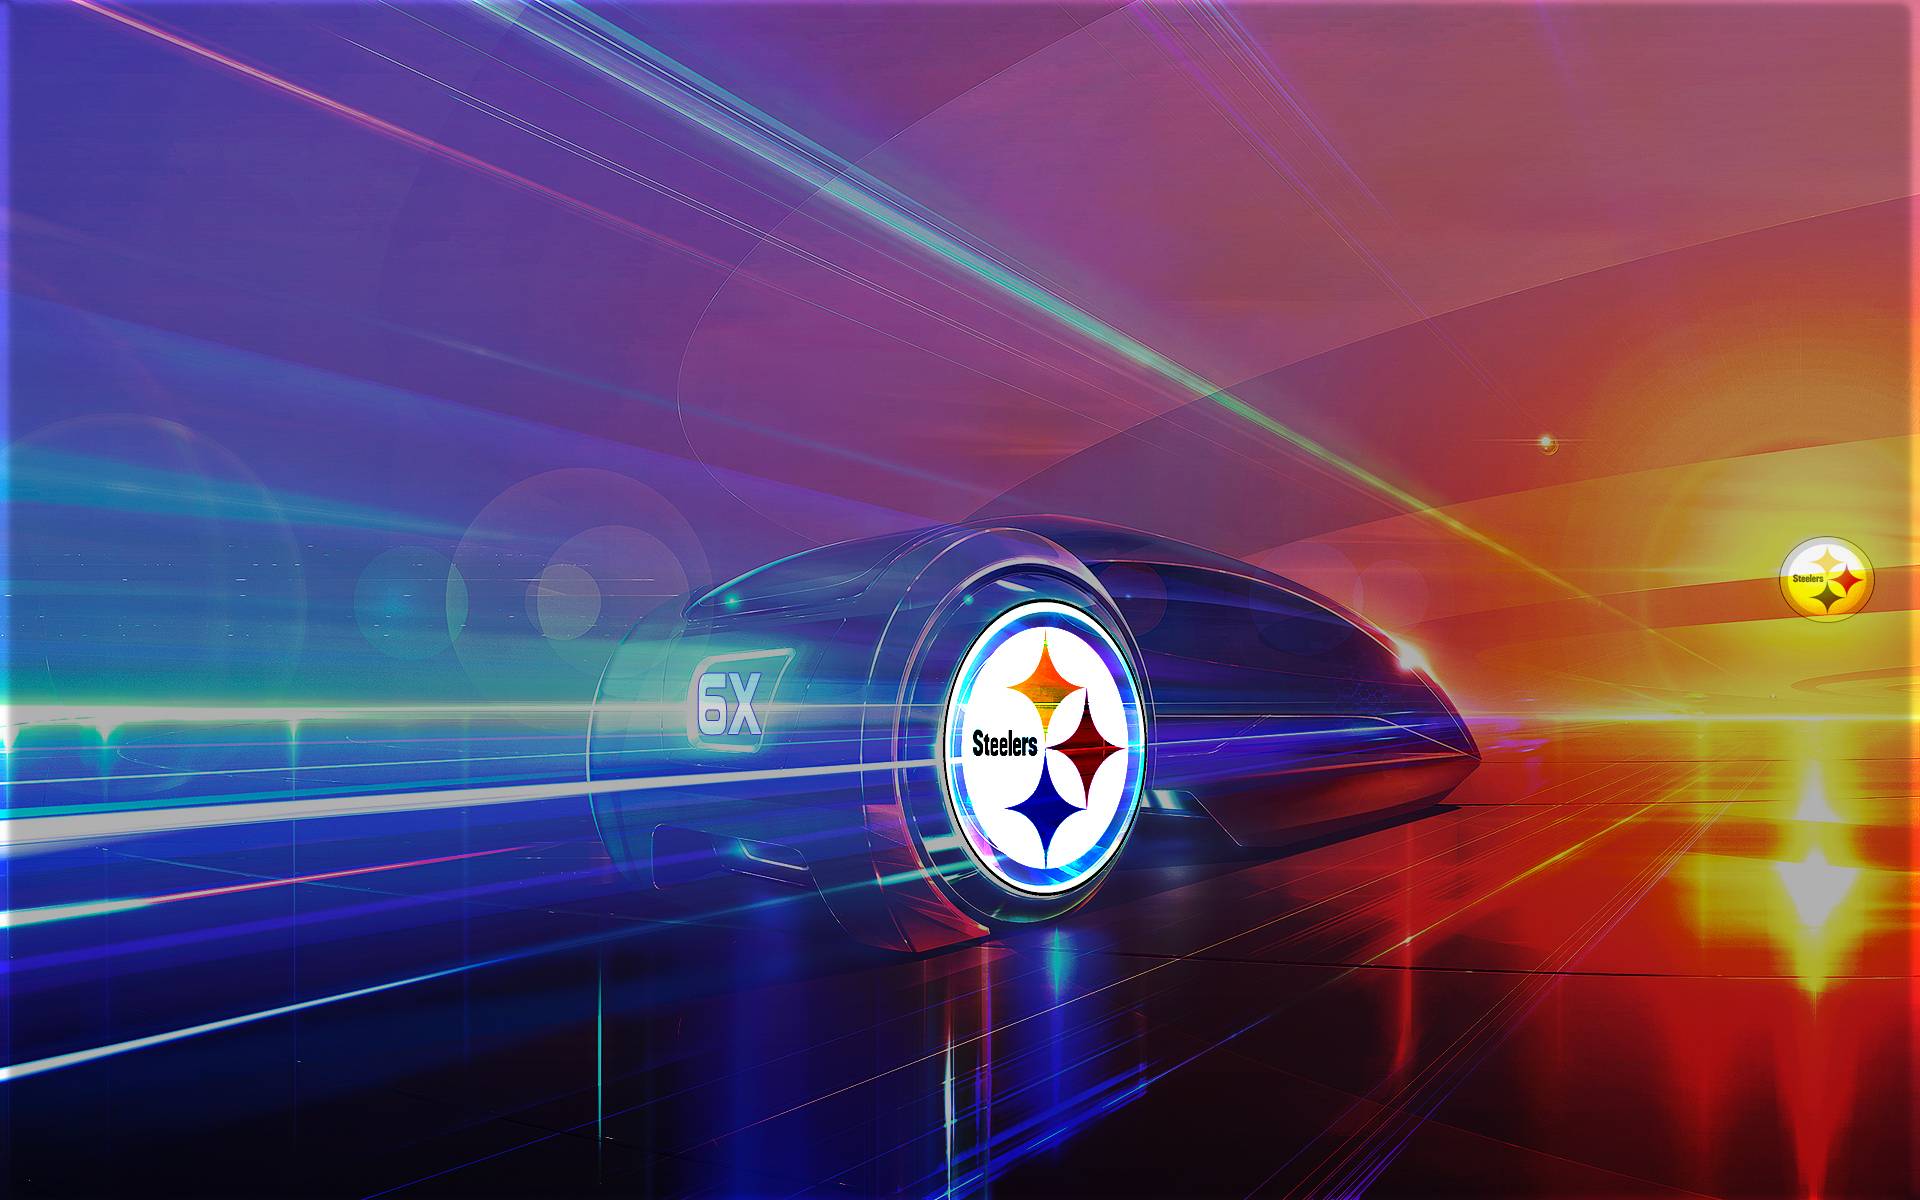 More Steelers Wallpaper loaded up